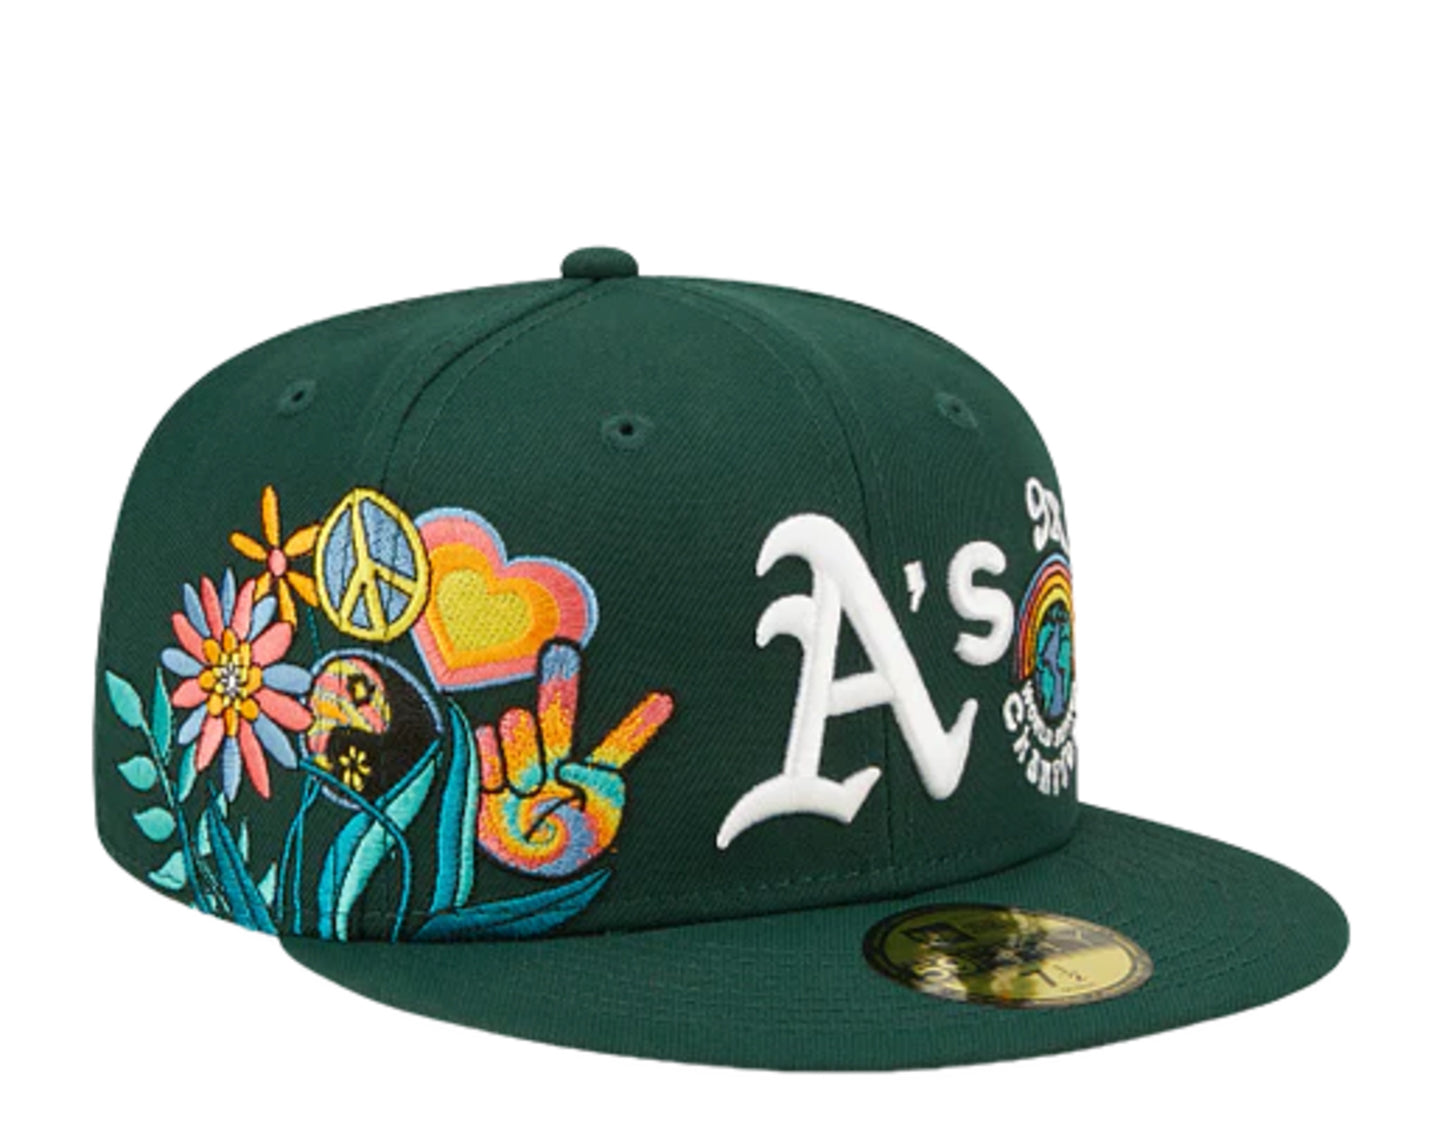 New Era 59Fifty MLB Oakland Athletics Groovy Fitted Hat